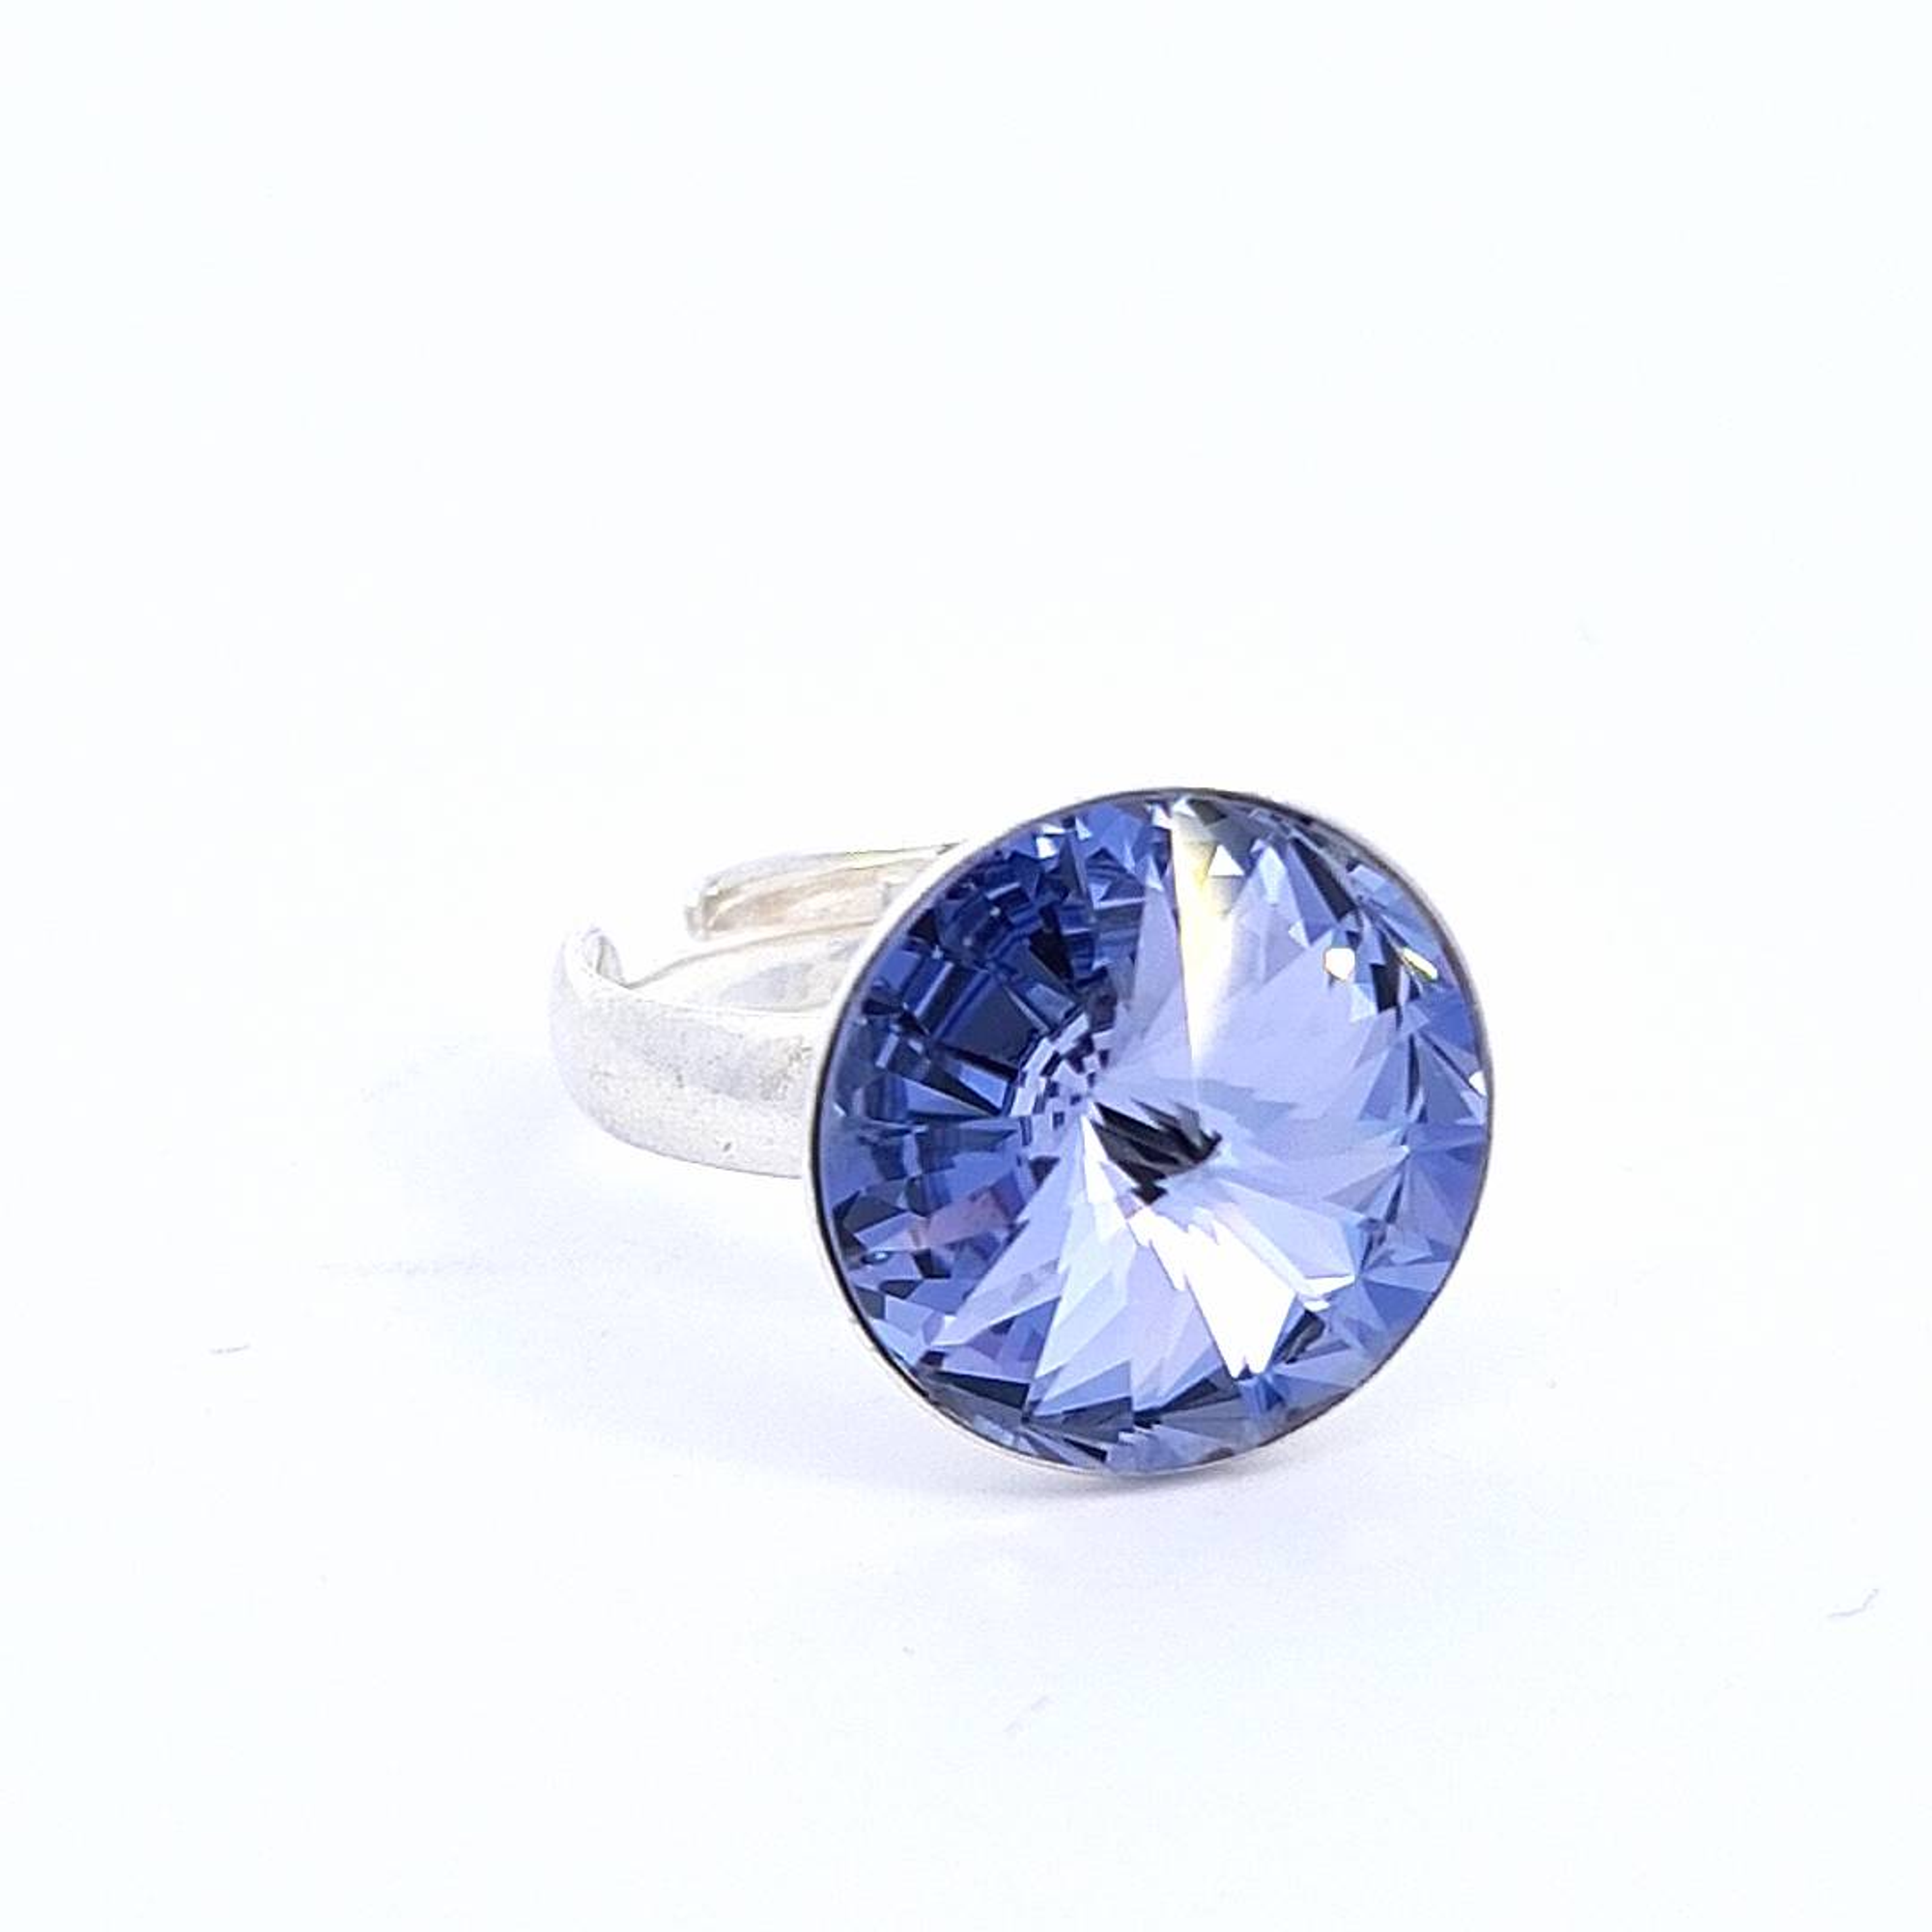 Spectra Solitaire Ring Front View featuring 14mm Round Rivoli Crystal in Sterling Silver - Tanzanite Purple - Magpie Gems Ireland